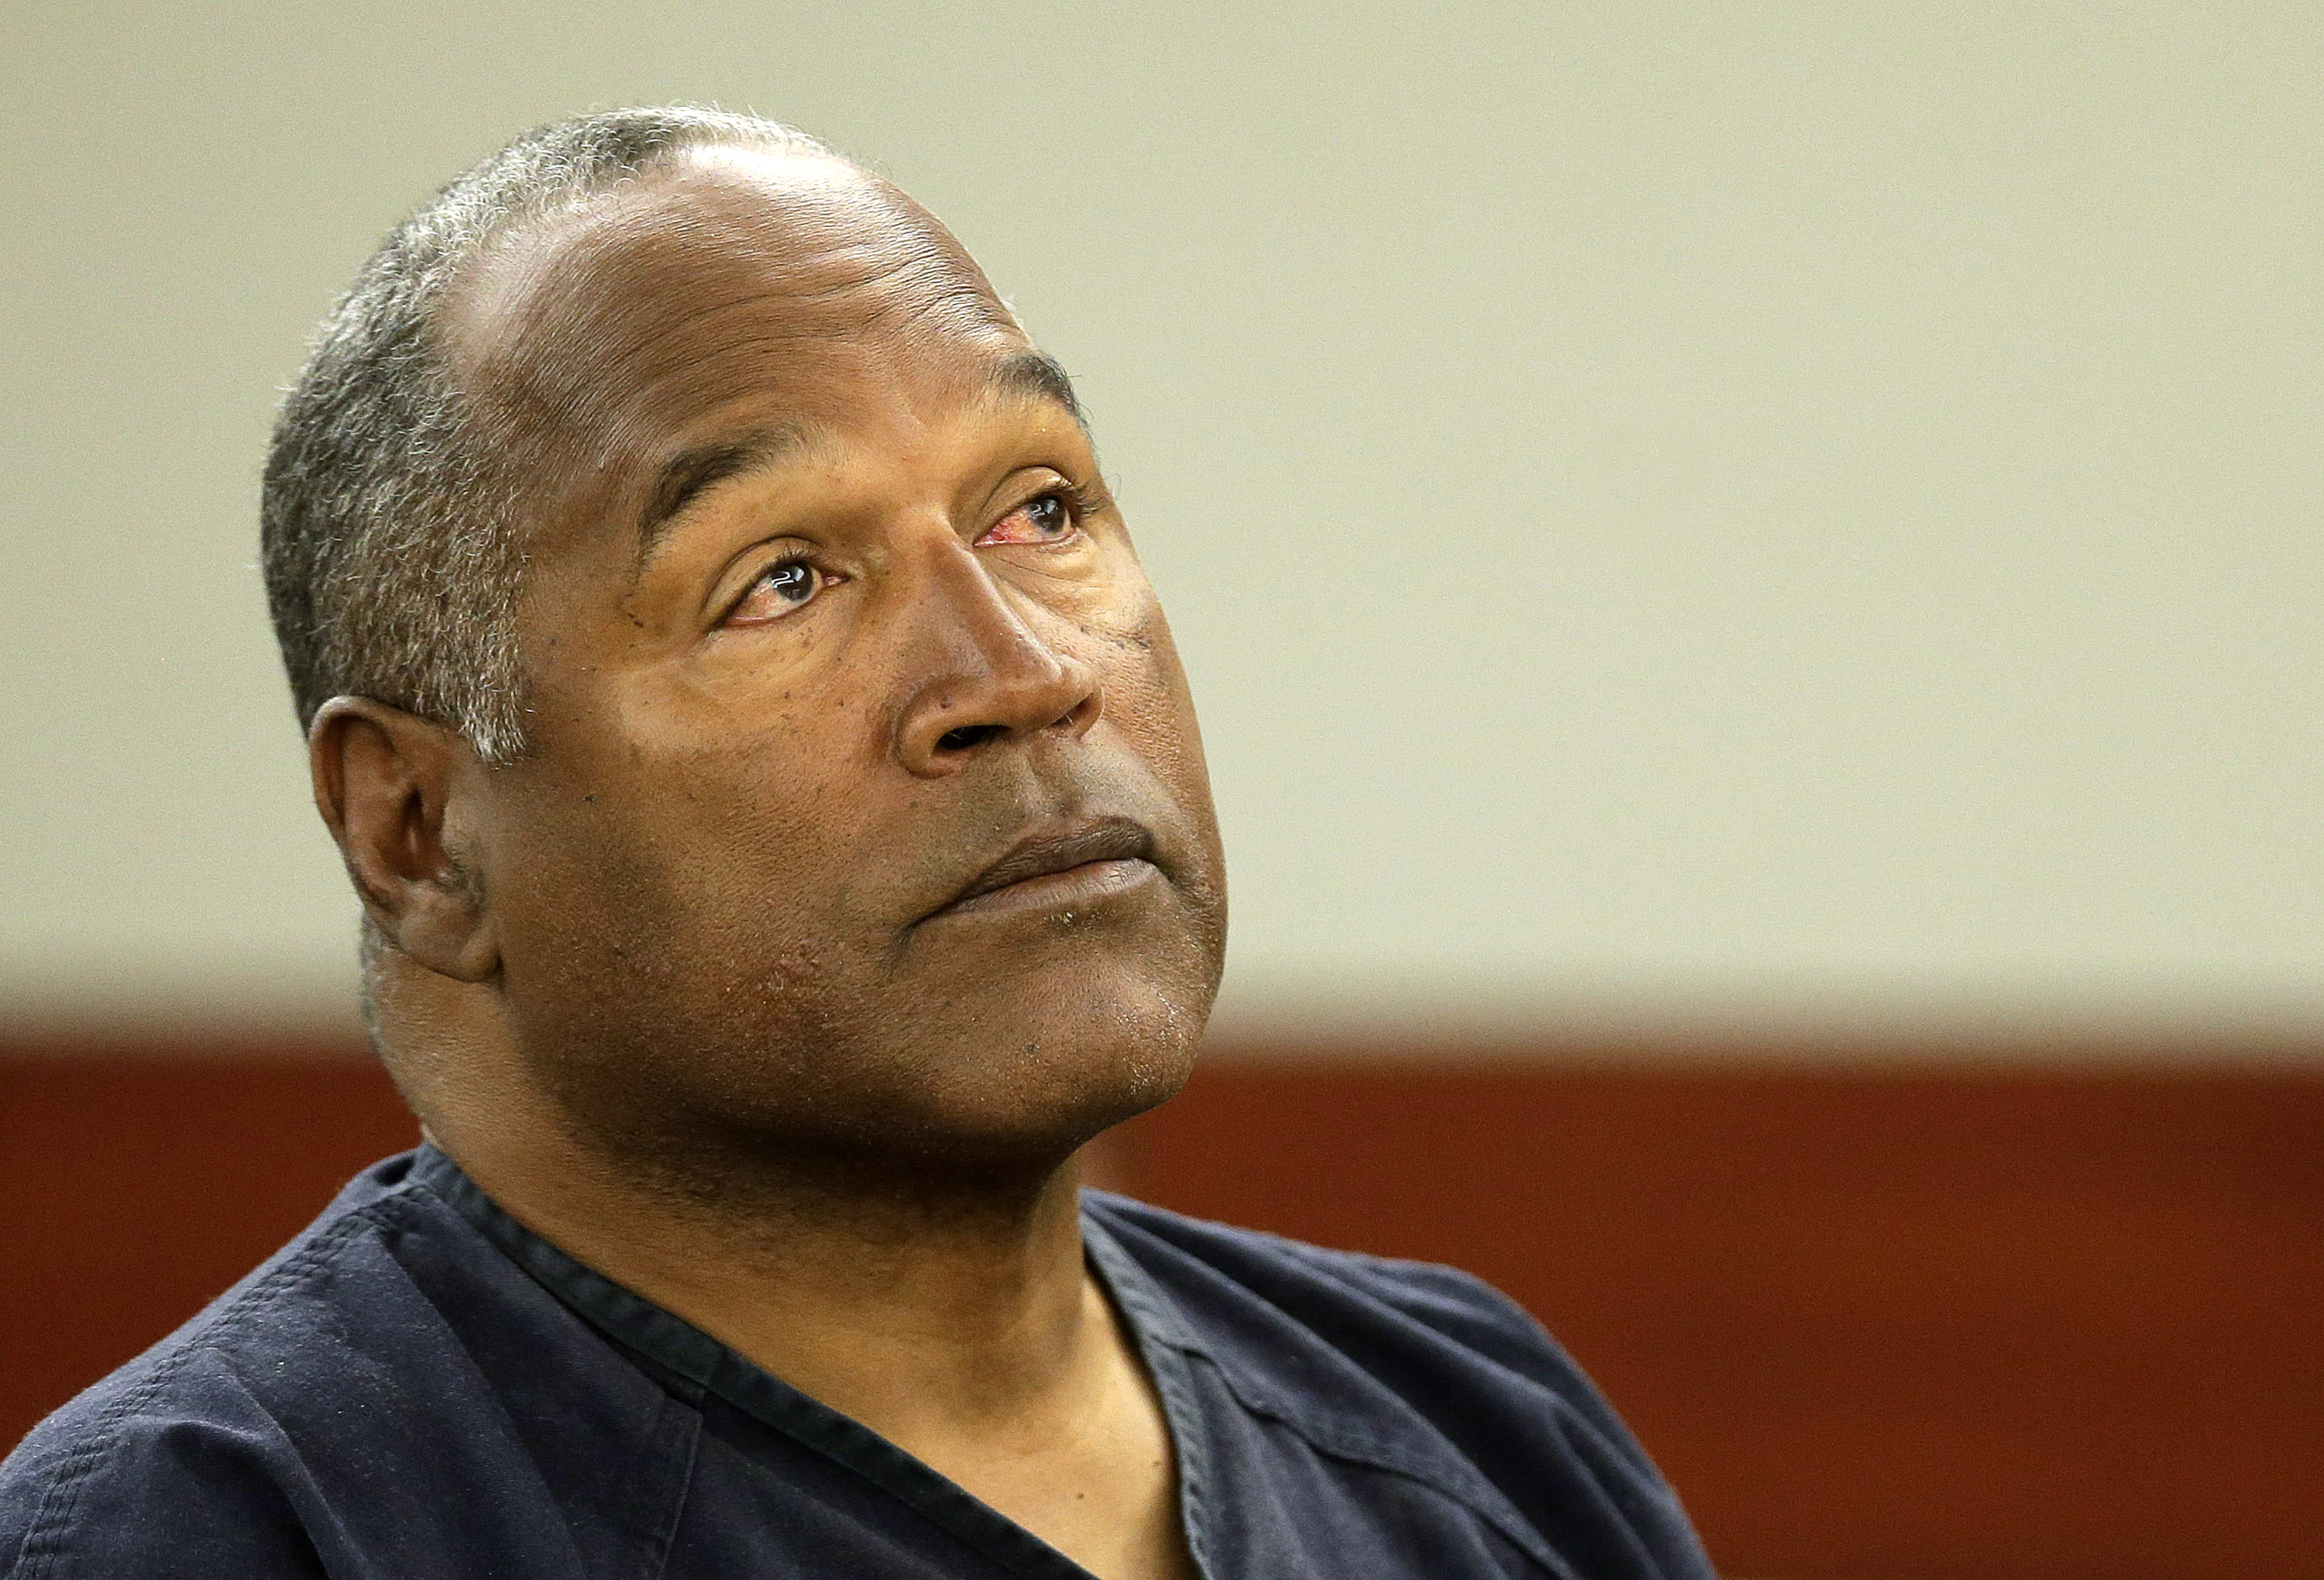 O.J. Simpson listens to testimony at an evidentiary hearing in Clark County District Court May 13, 2013 in Las Vegas, Nevada. (Pool&mdash;Getty Images)